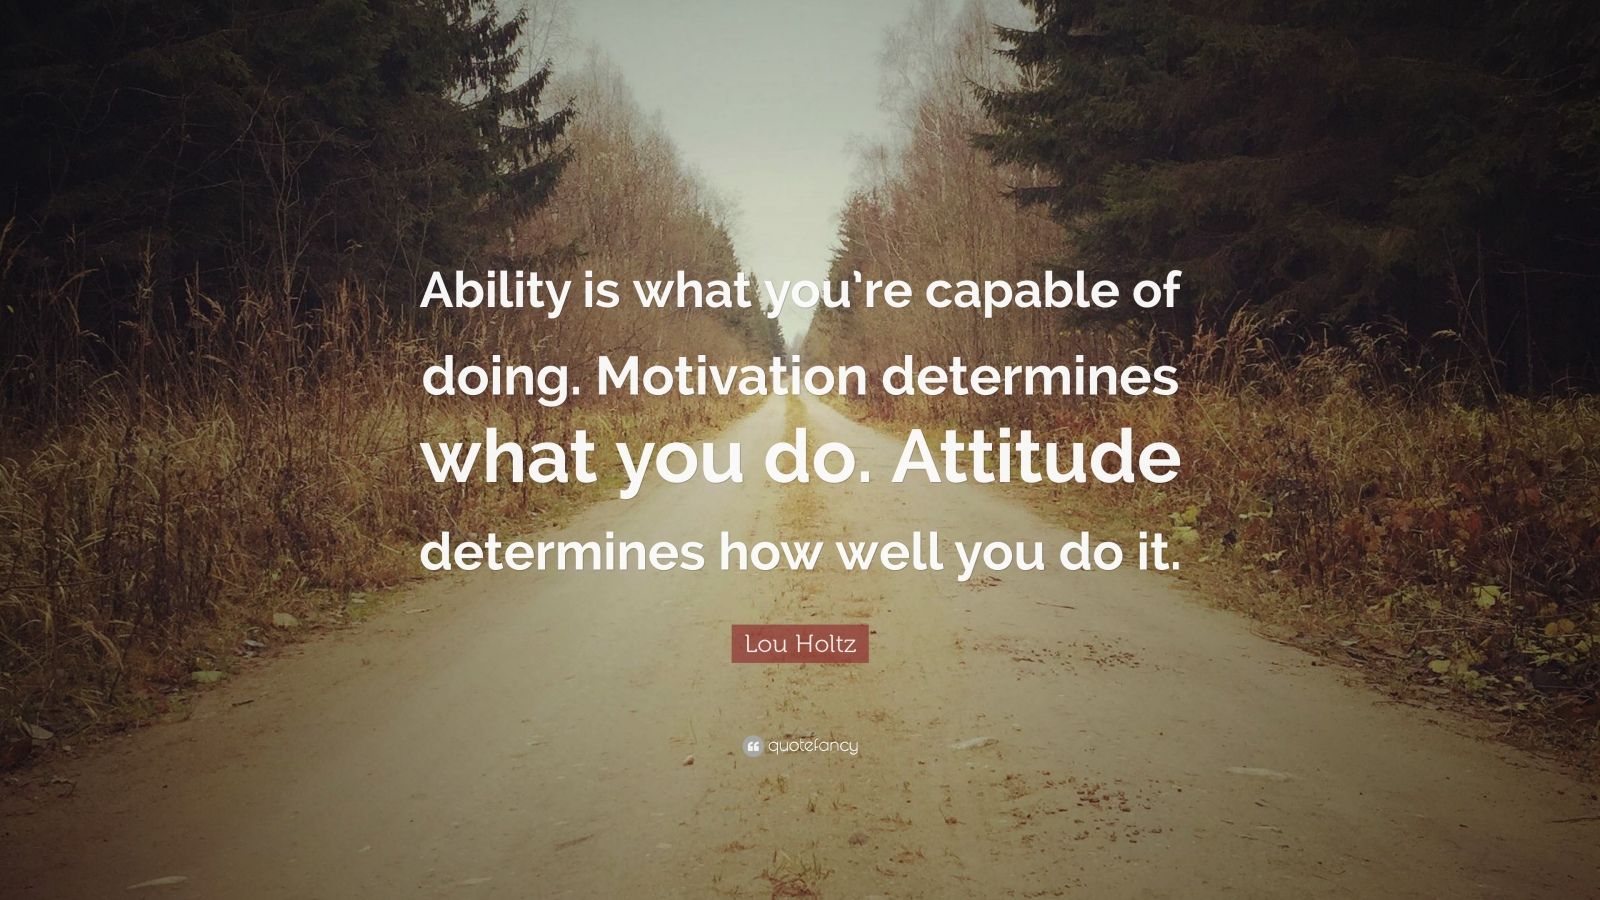 Lou Holtz Quote: “Ability is what you’re capable of doing. Motivation